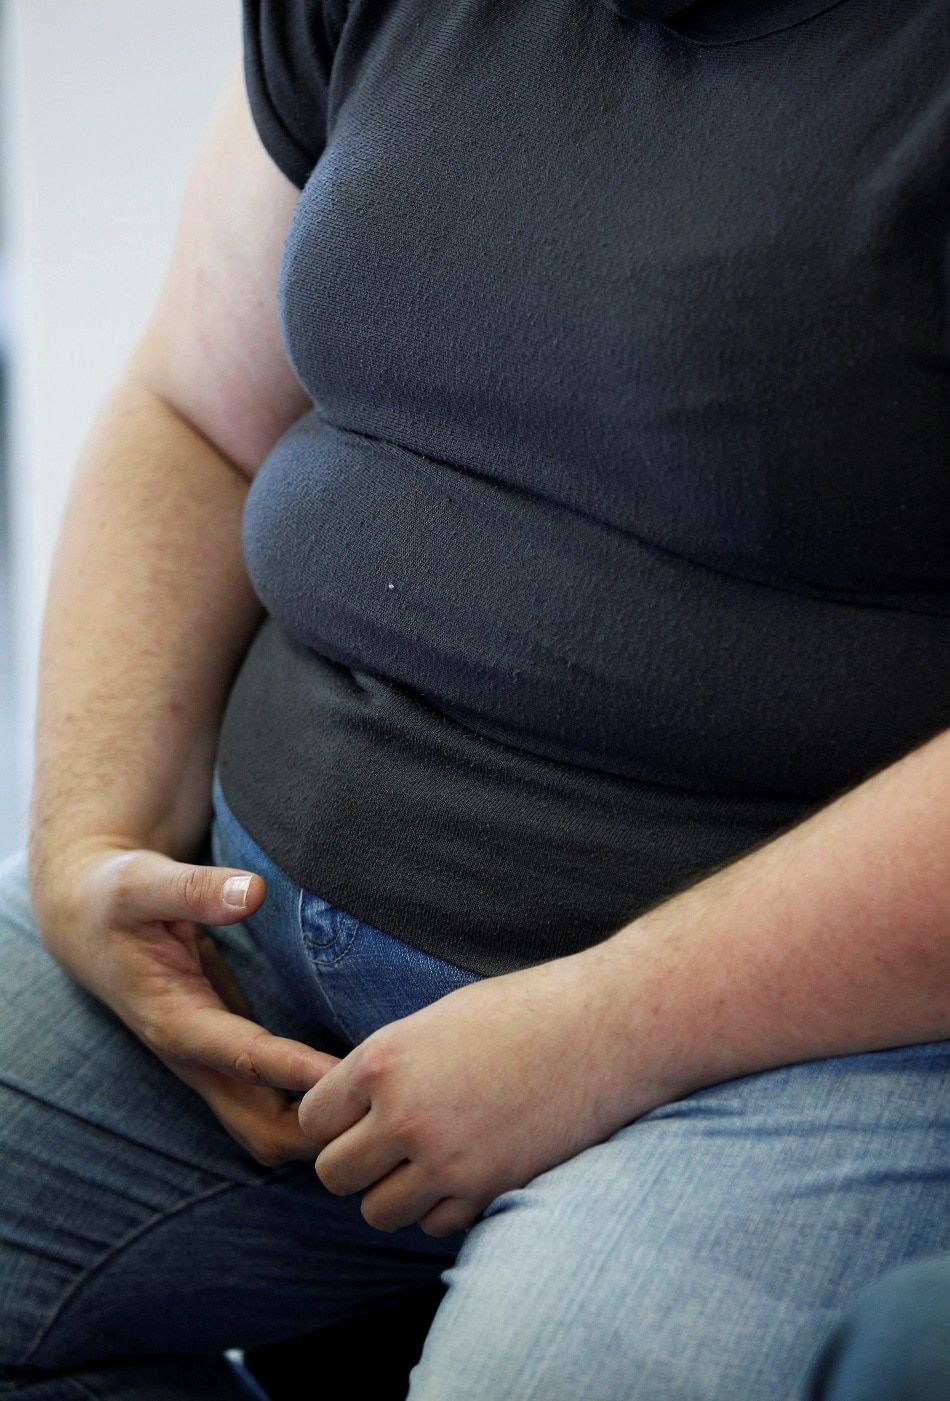 Obesity a driving factor in COVID-19 deaths, global report finds 1